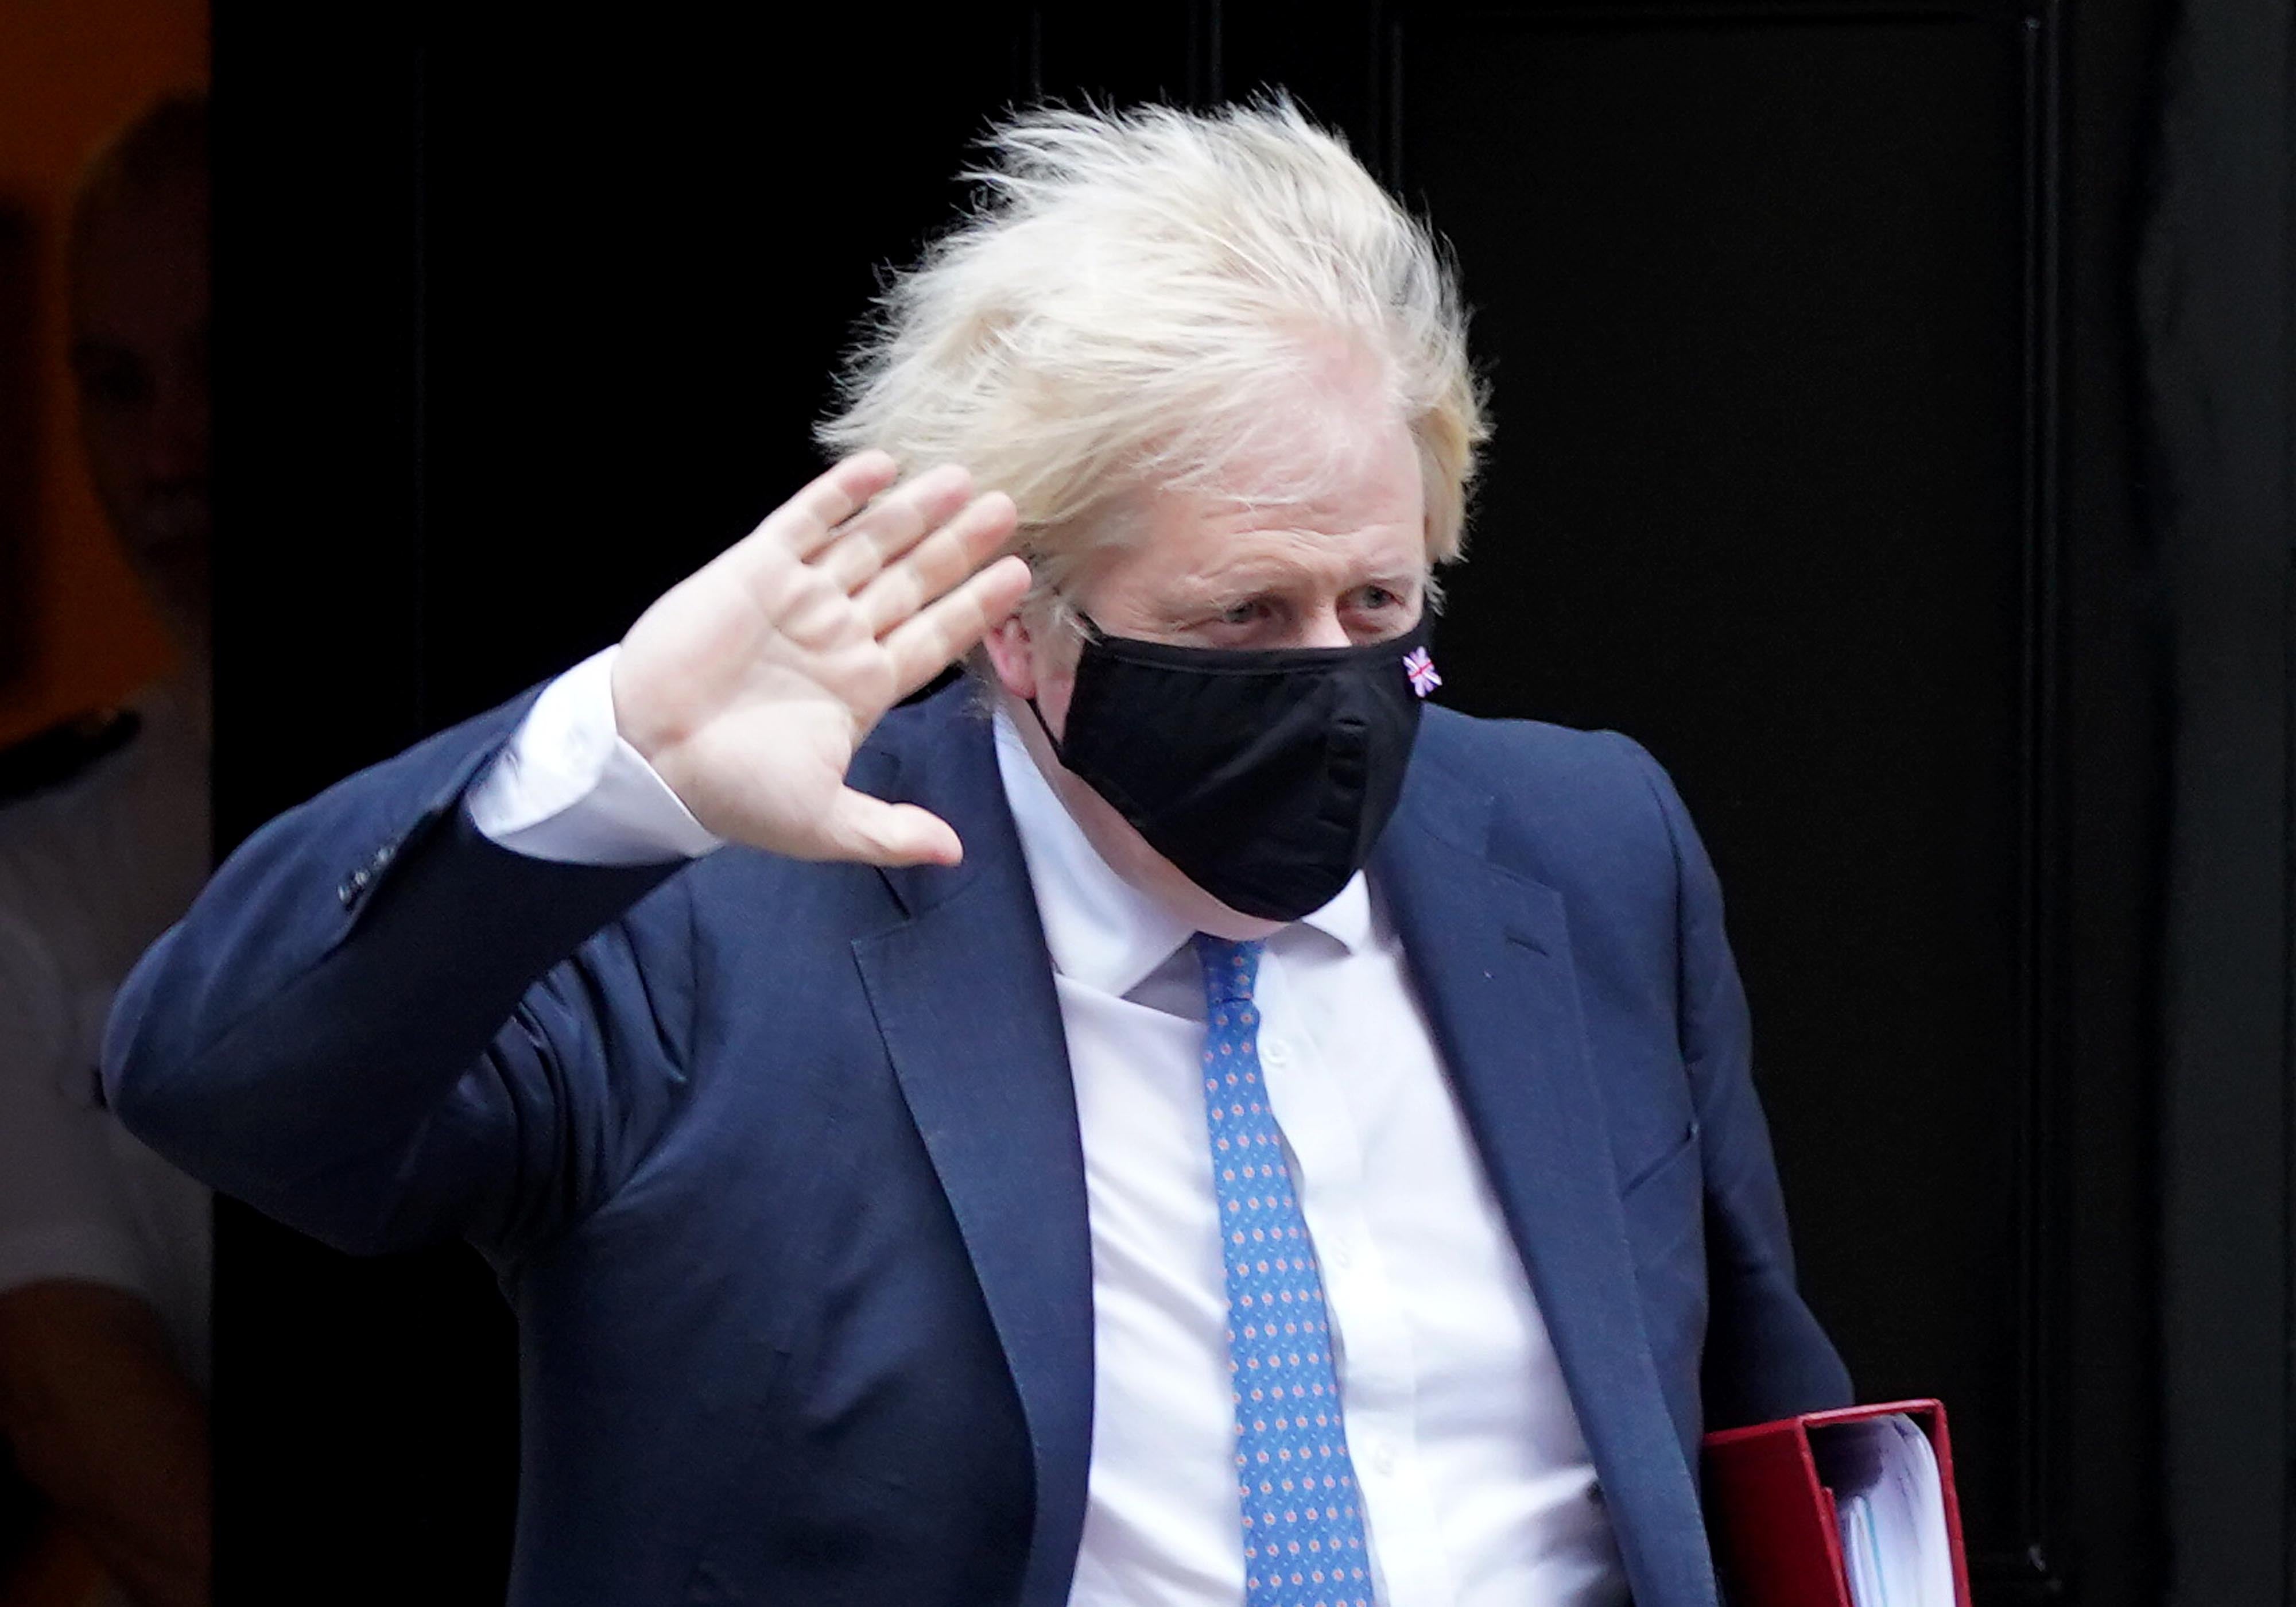 Prime Minister Boris Johnson is said to have been ‘deeply disturbed’ by the case (Stefan Rousseau/PA)